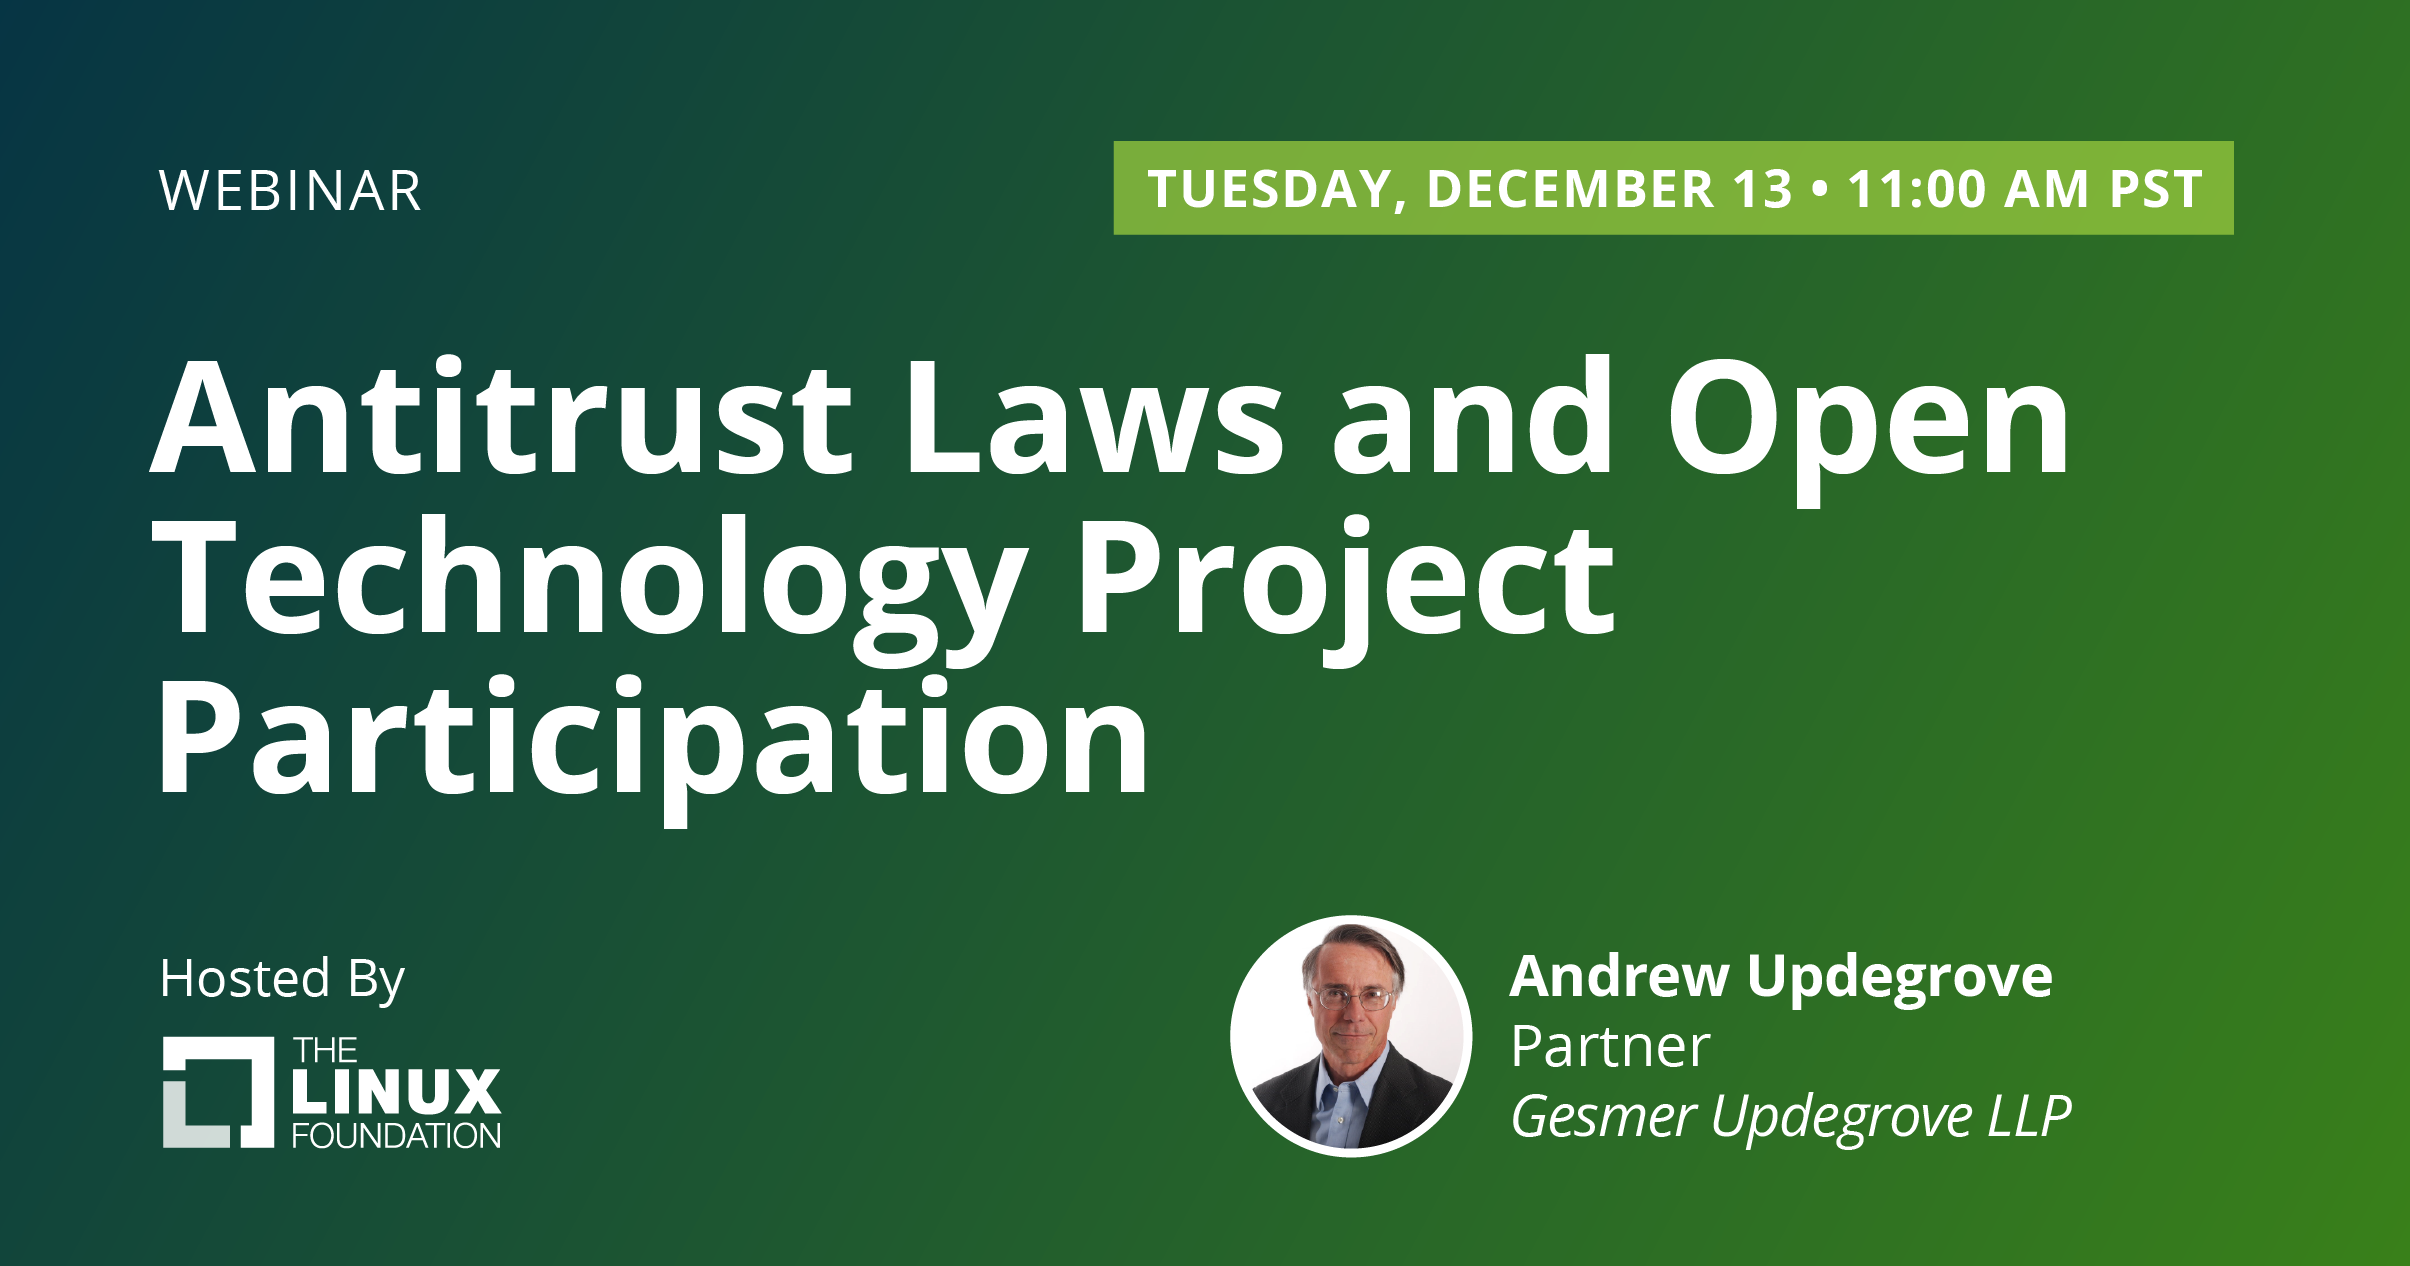 Antitrust Laws and Open Technology Project Participation featured image